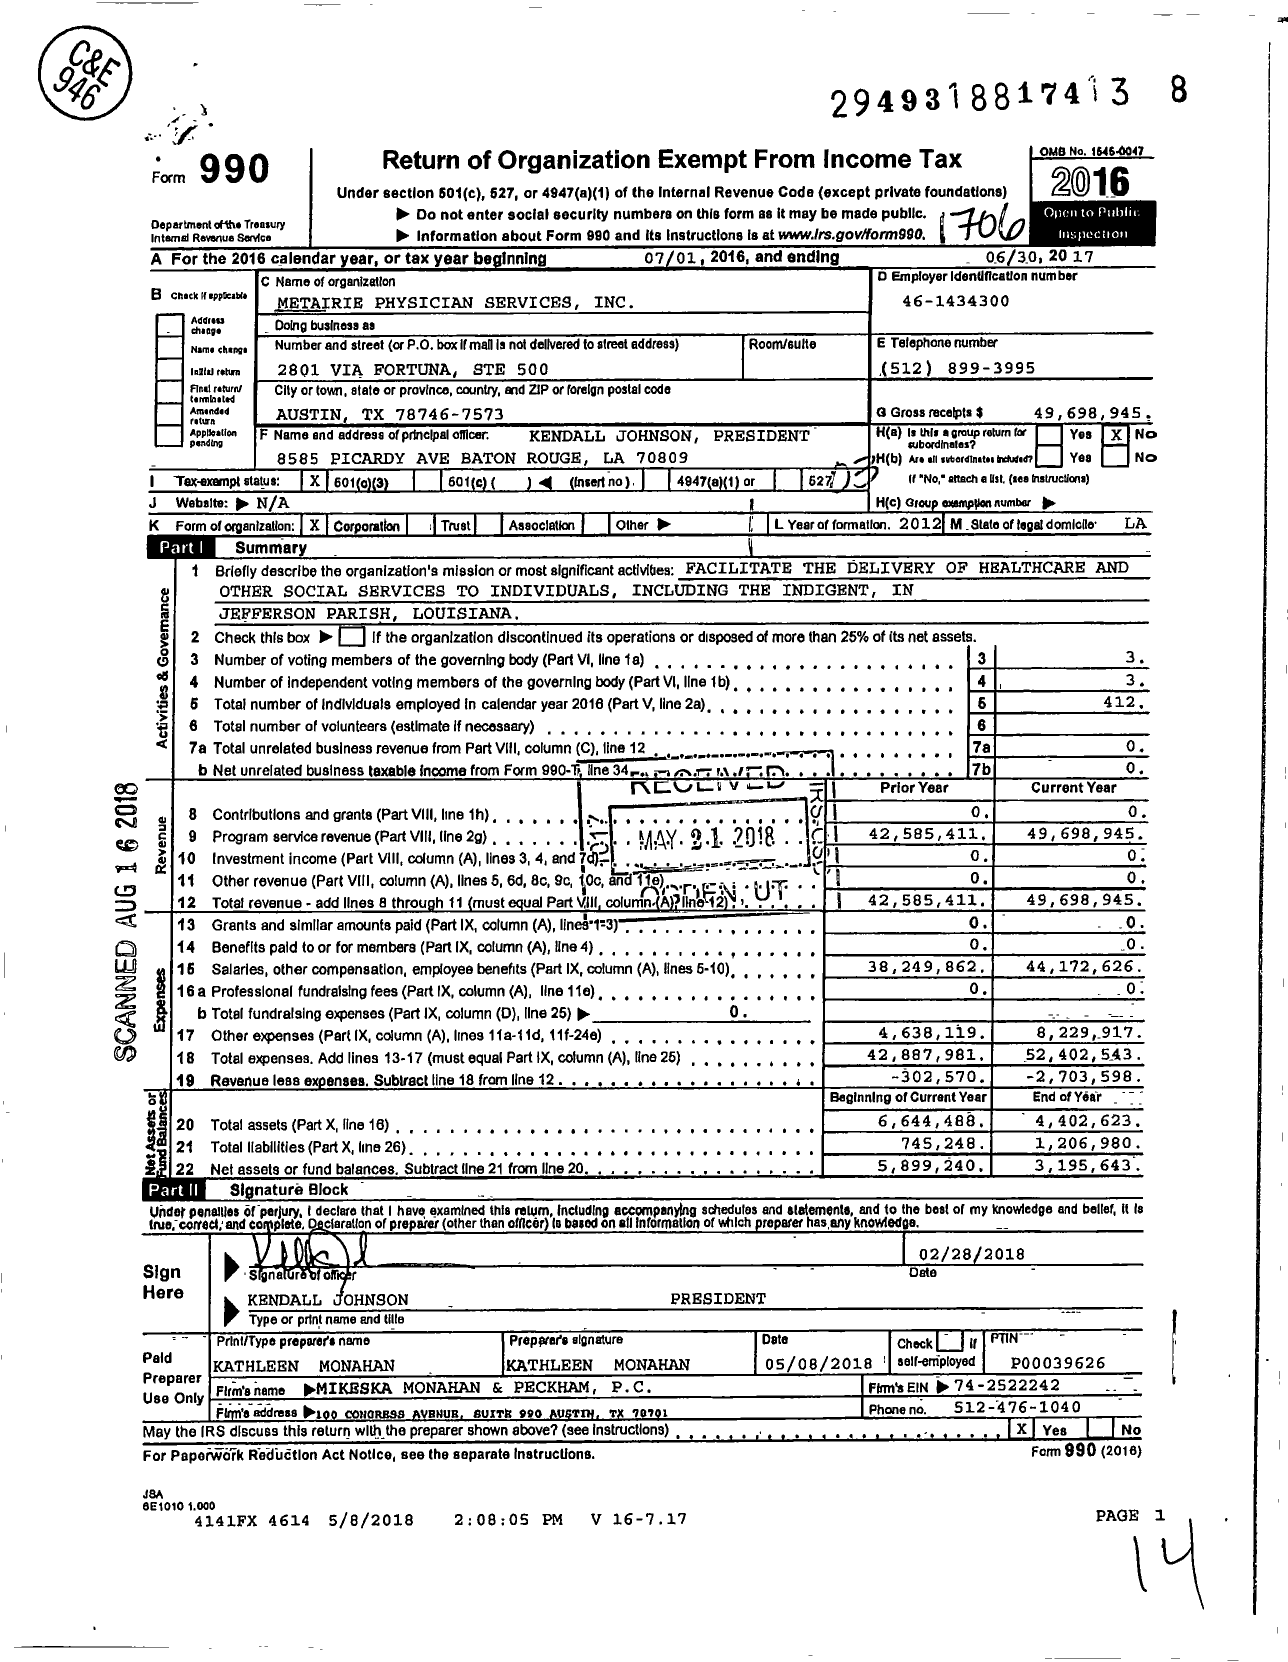 Image of first page of 2016 Form 990 for Metairie Physicians Services